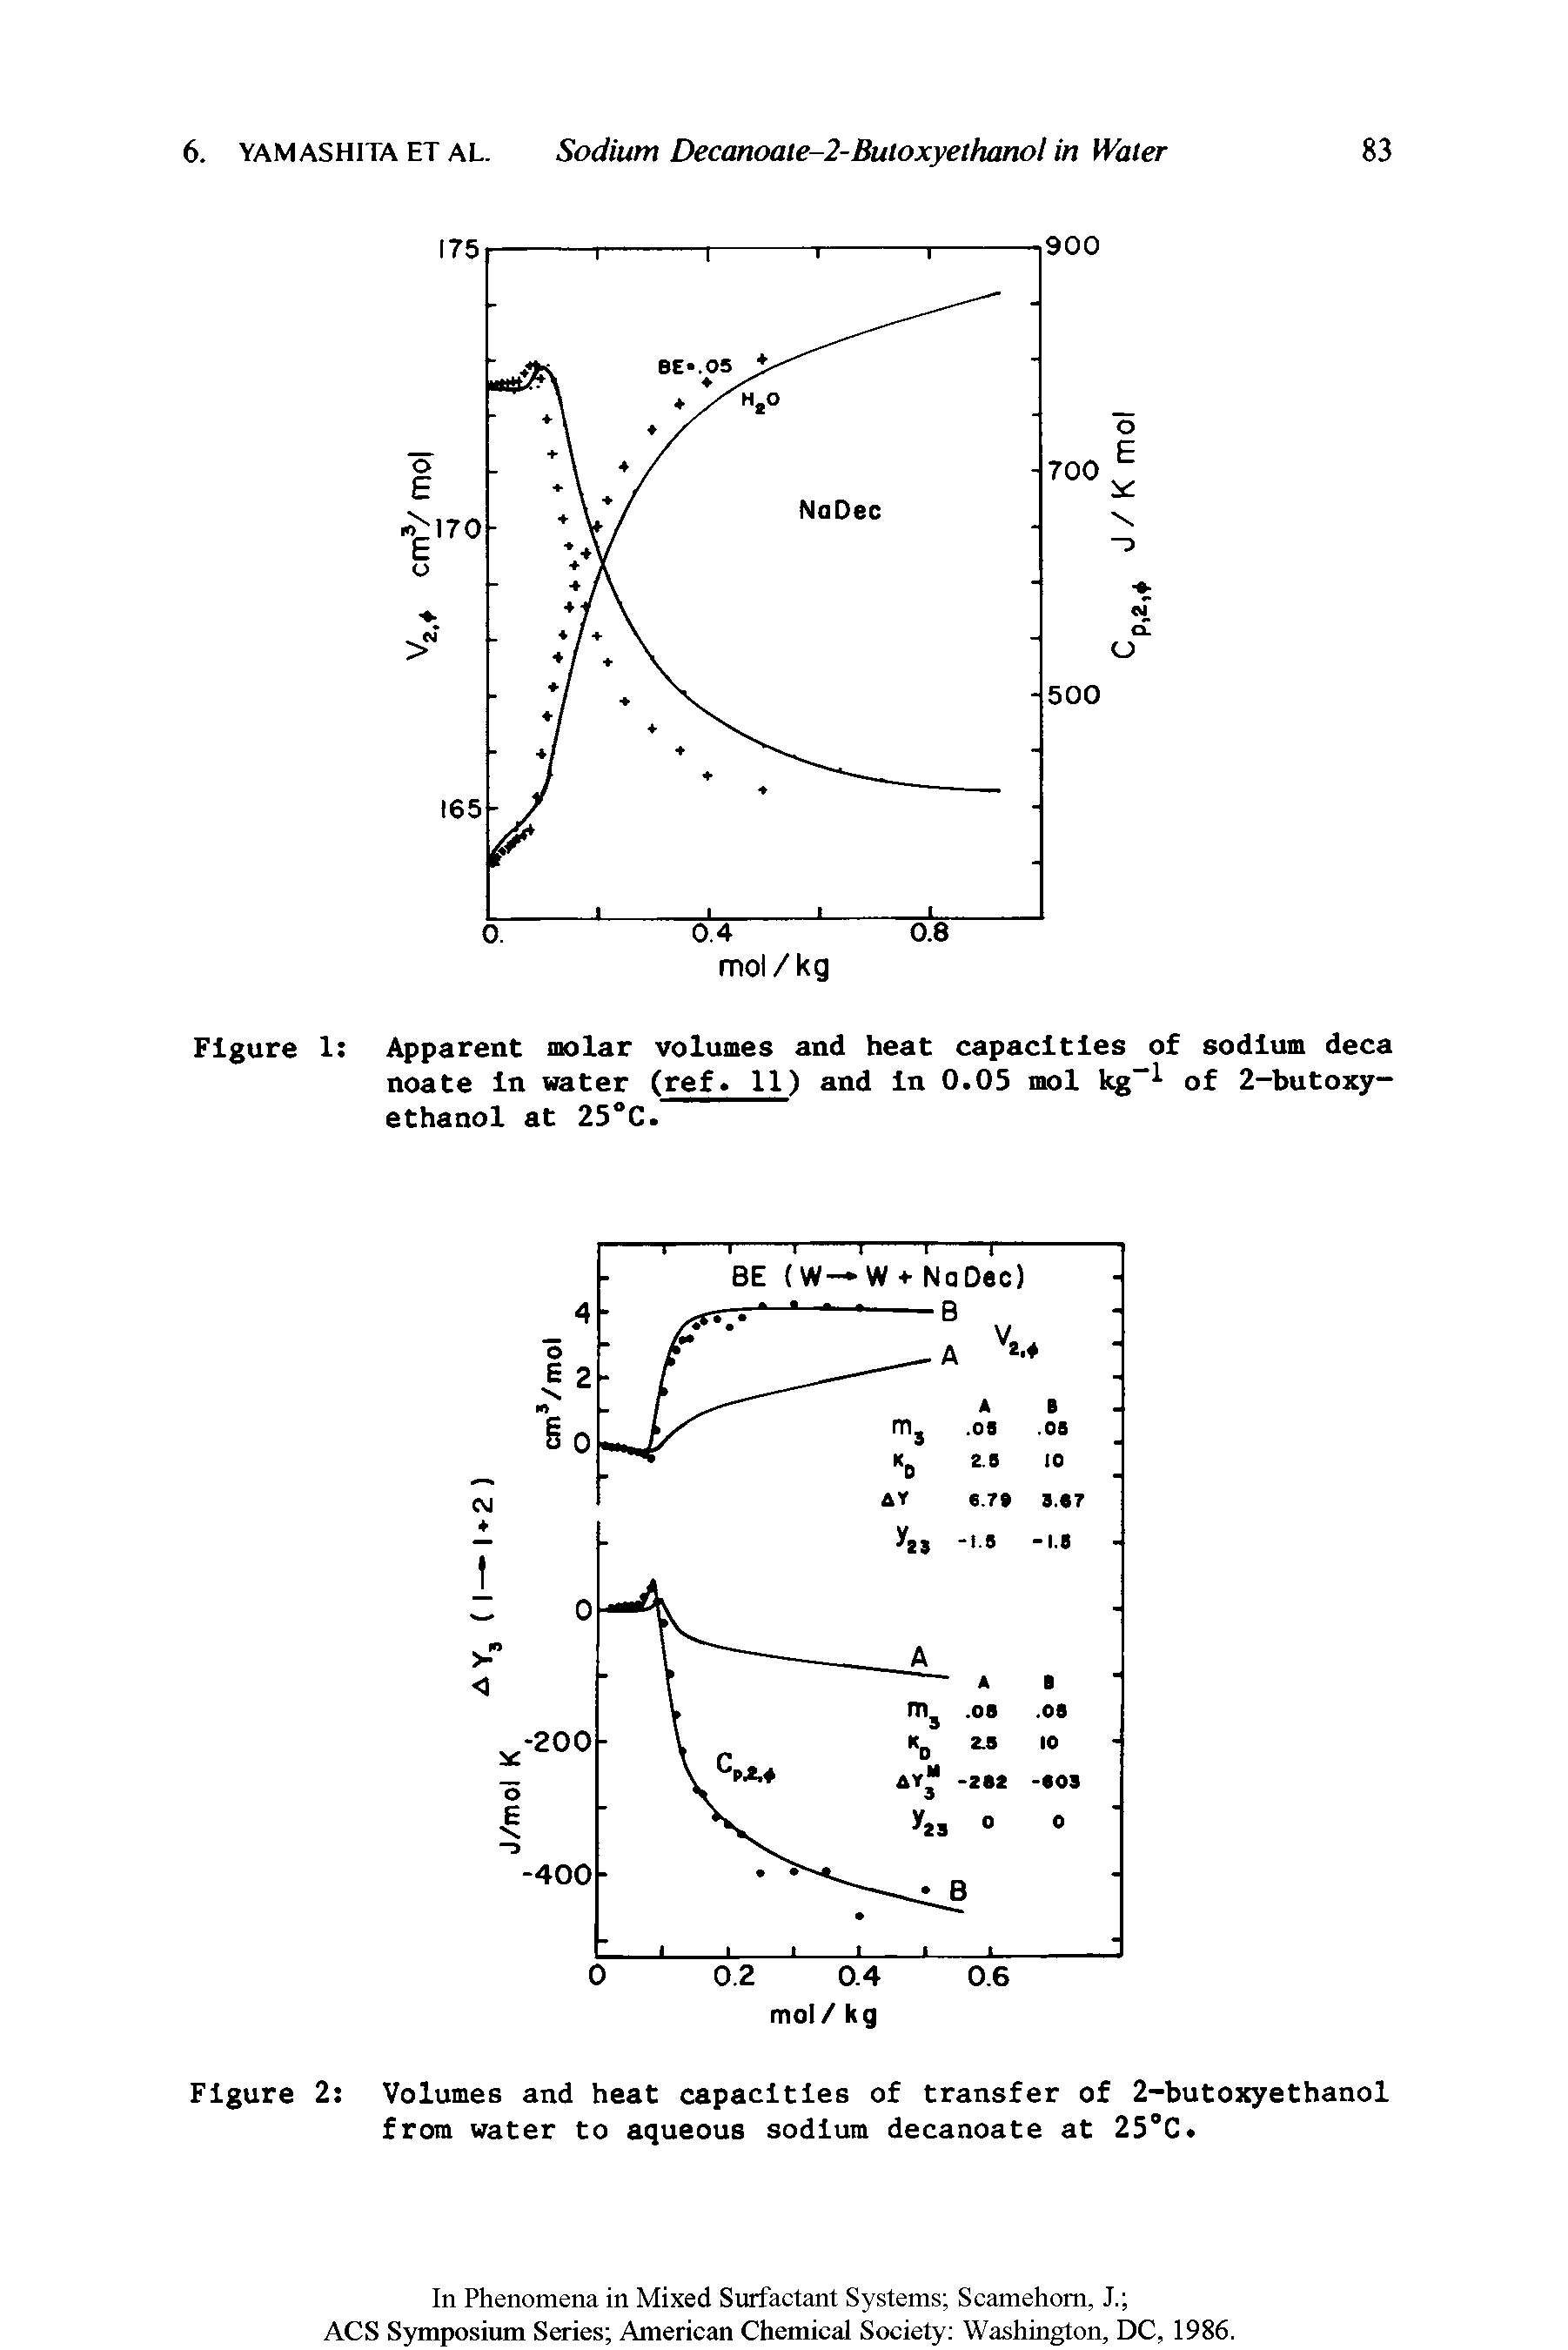 Figure 2 Volumes and heat capacities of transfer of 2-butoxyethanol from water to aqueous sodium decanoate at 25°C.